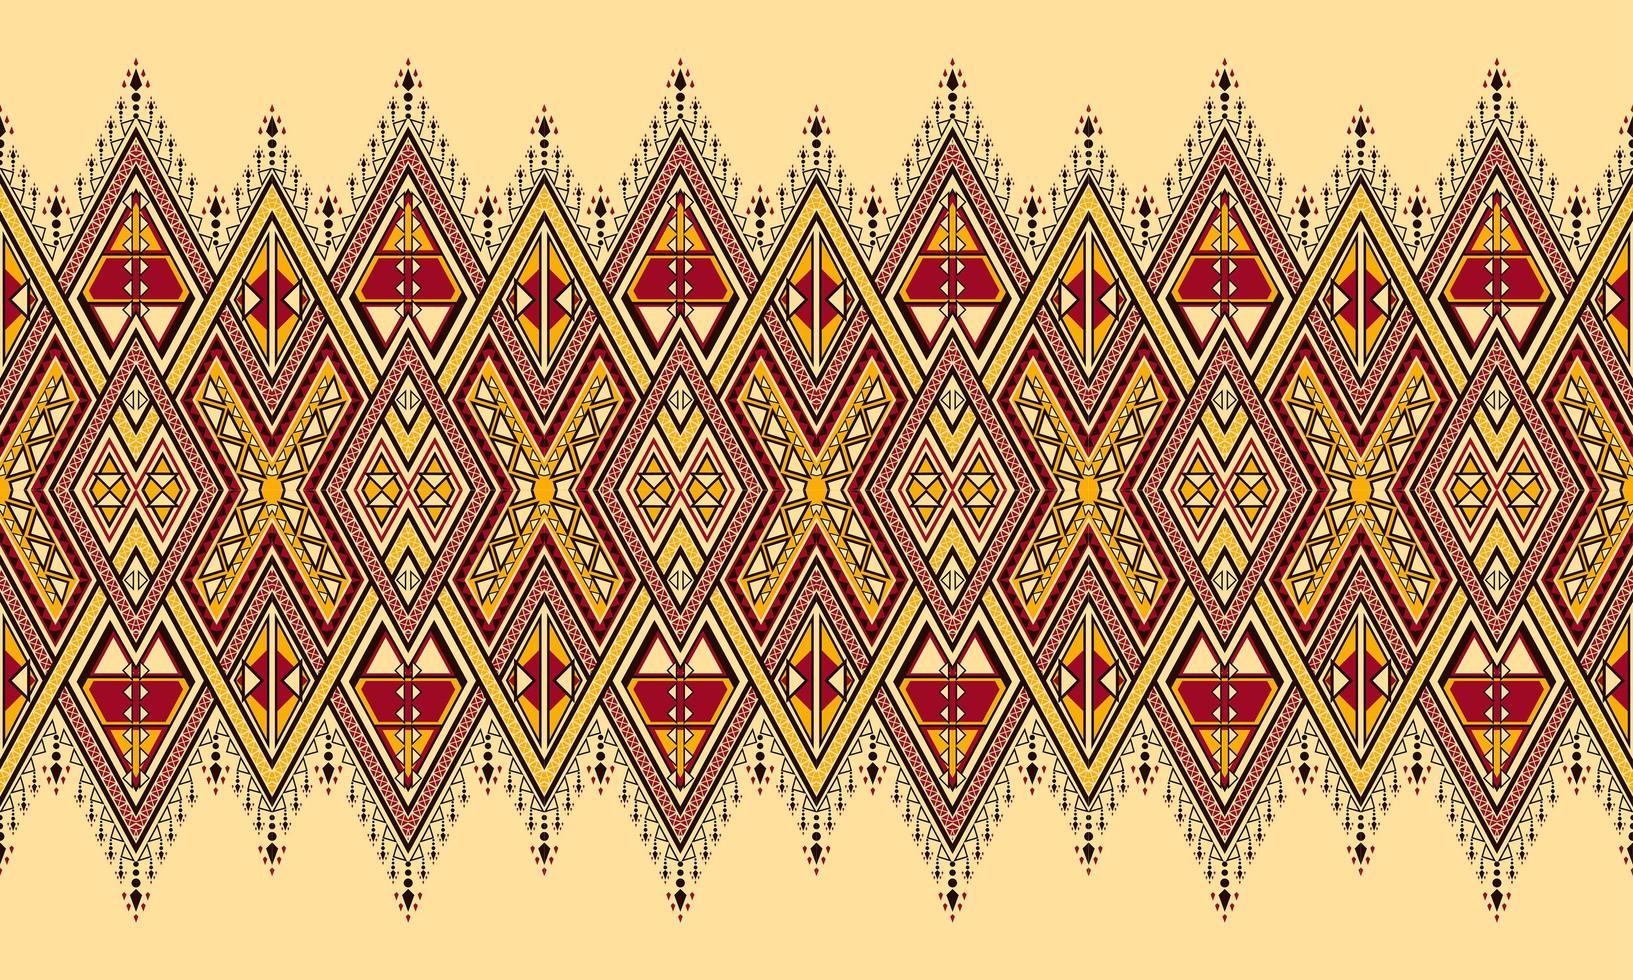 Geometric ethnic pattern embroidery .carpet,wallpaper,clothing,wrapping,batik,fabric,Vector illustration embroidery style. vector